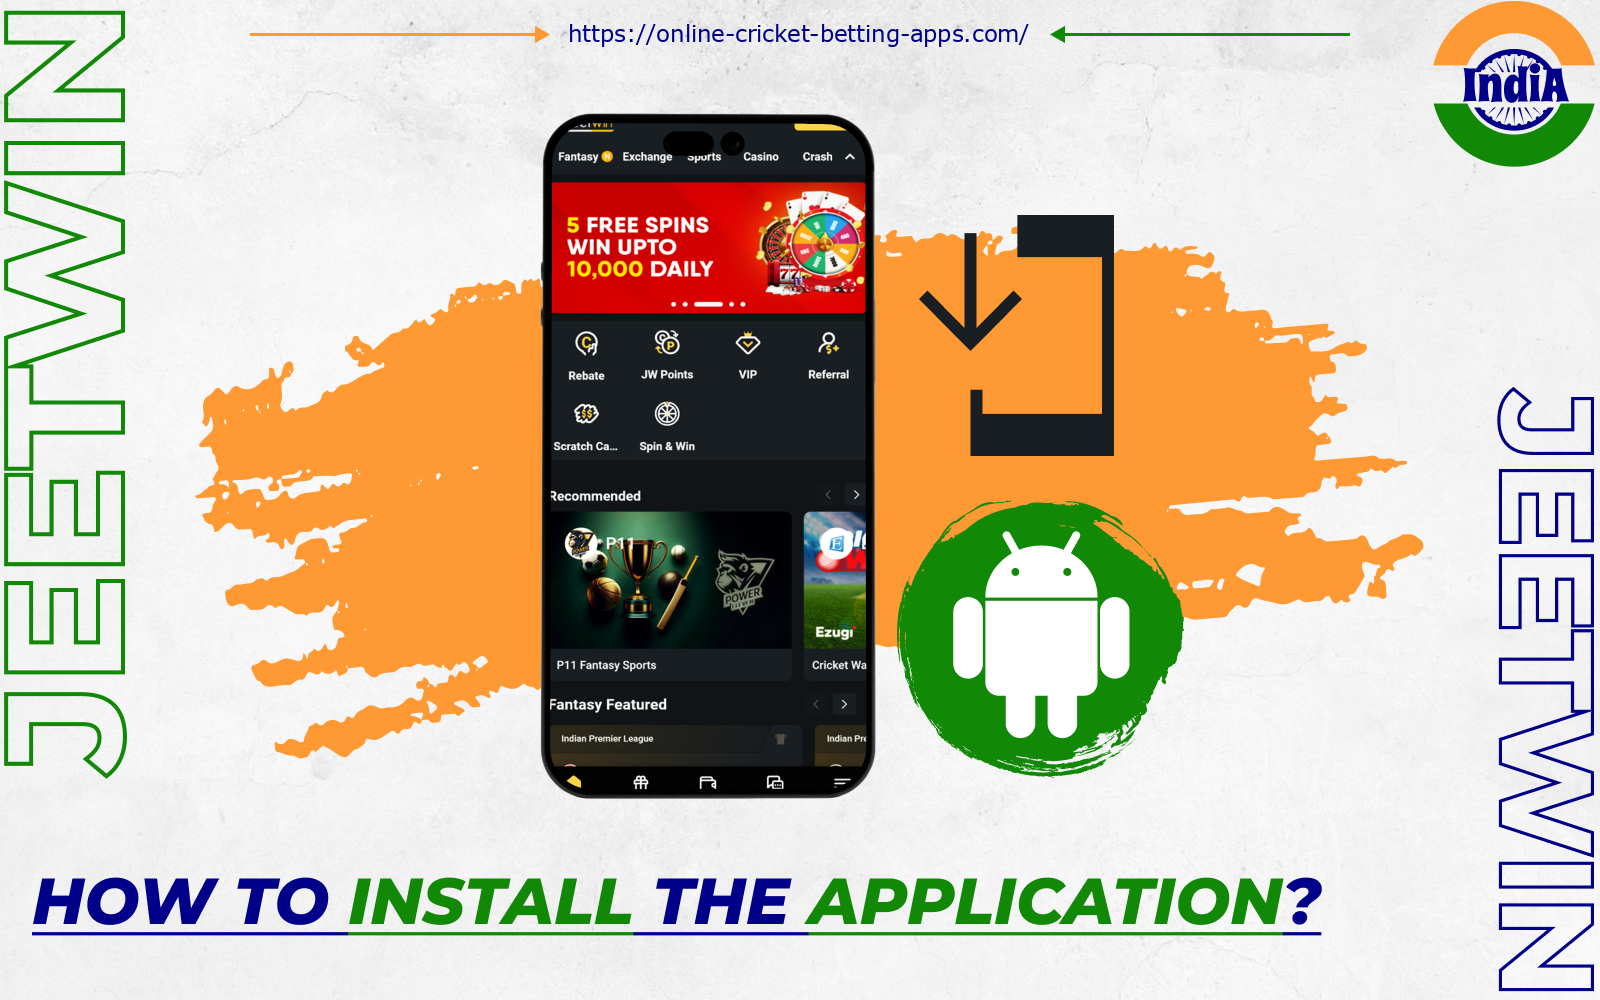 After installing the Jeetwin app, players from India can log in to their account and start playing